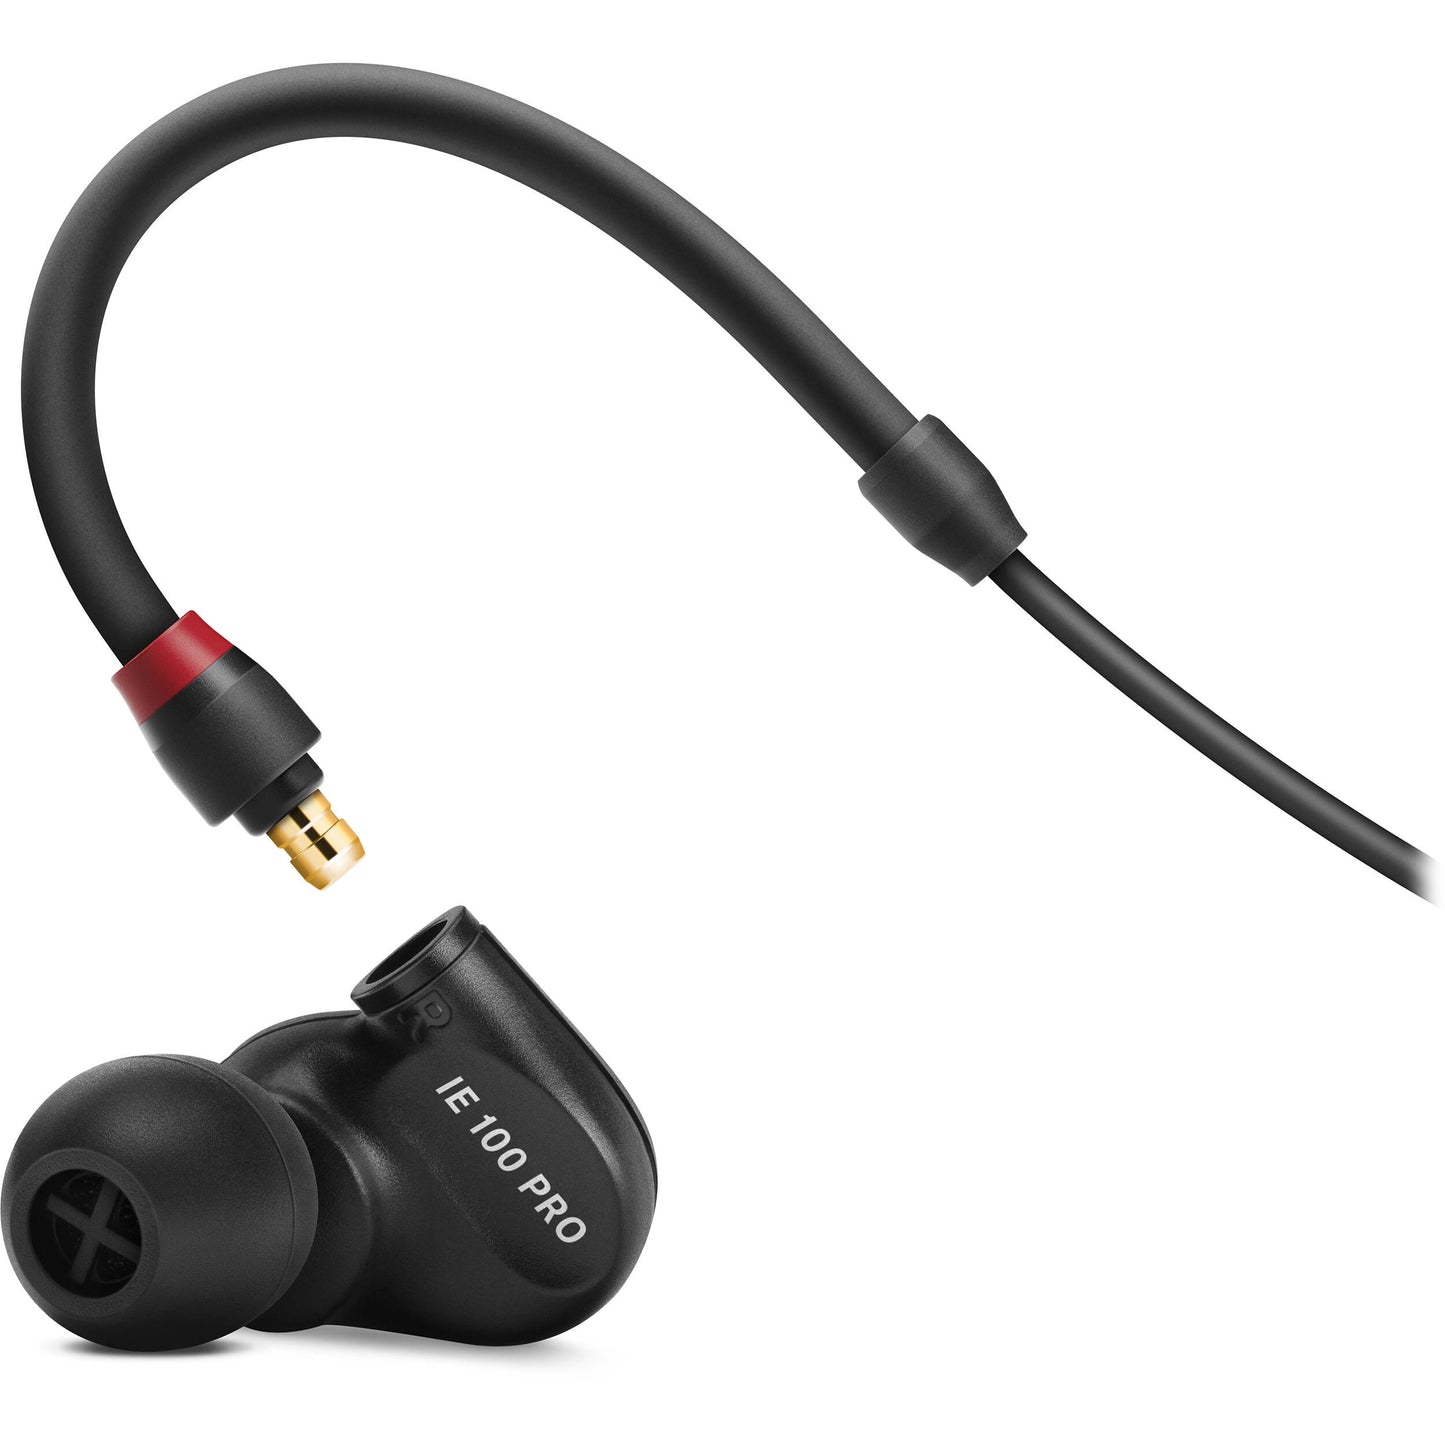 Sennheiser IE 100 PRO BT Bundle Dynamic In-Ear Monitoring Headphones Wireless Wired with Bluetooth 5.0 Detachable Cables Soft Pouch Cleaning Kit